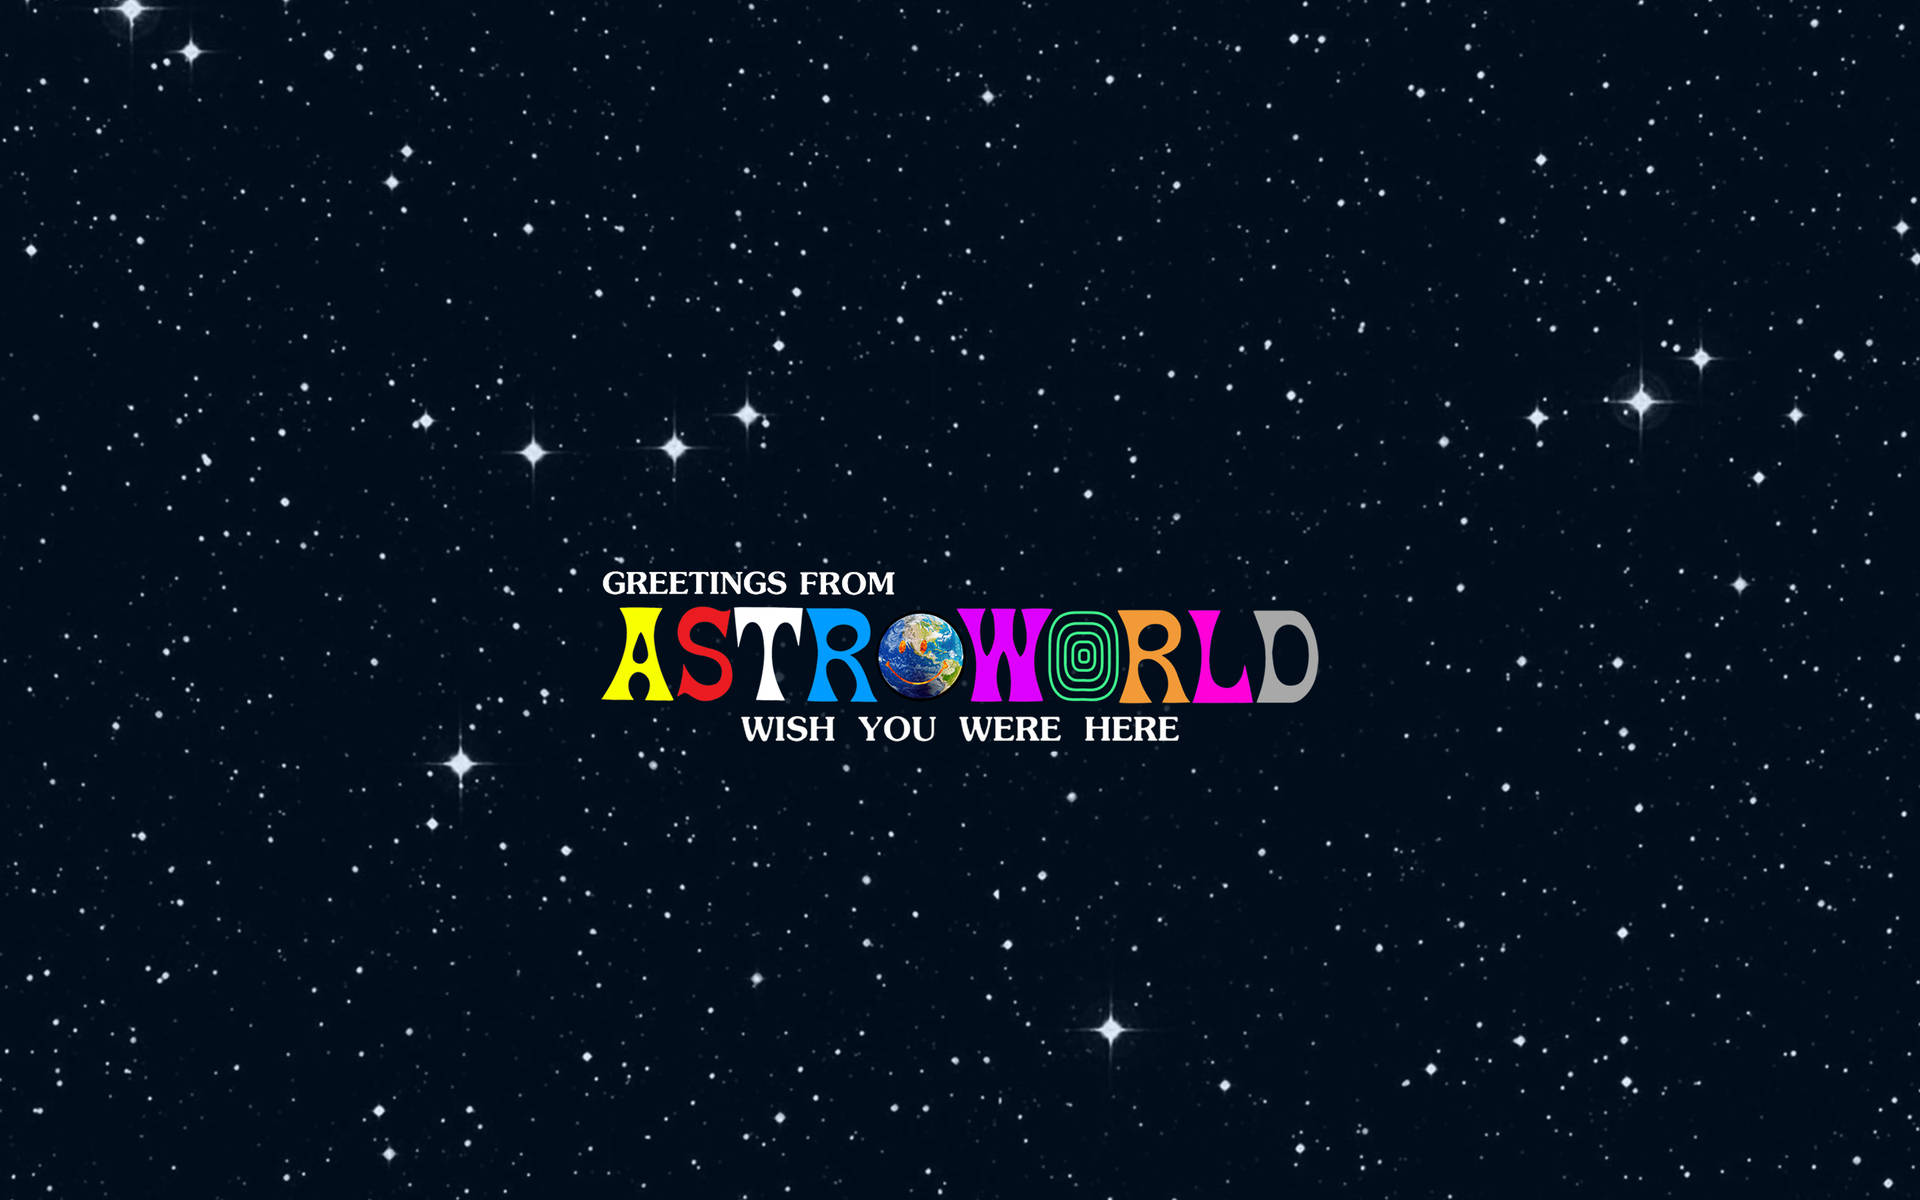 “Been in this game since day 1!” - Astroworld Wallpaper